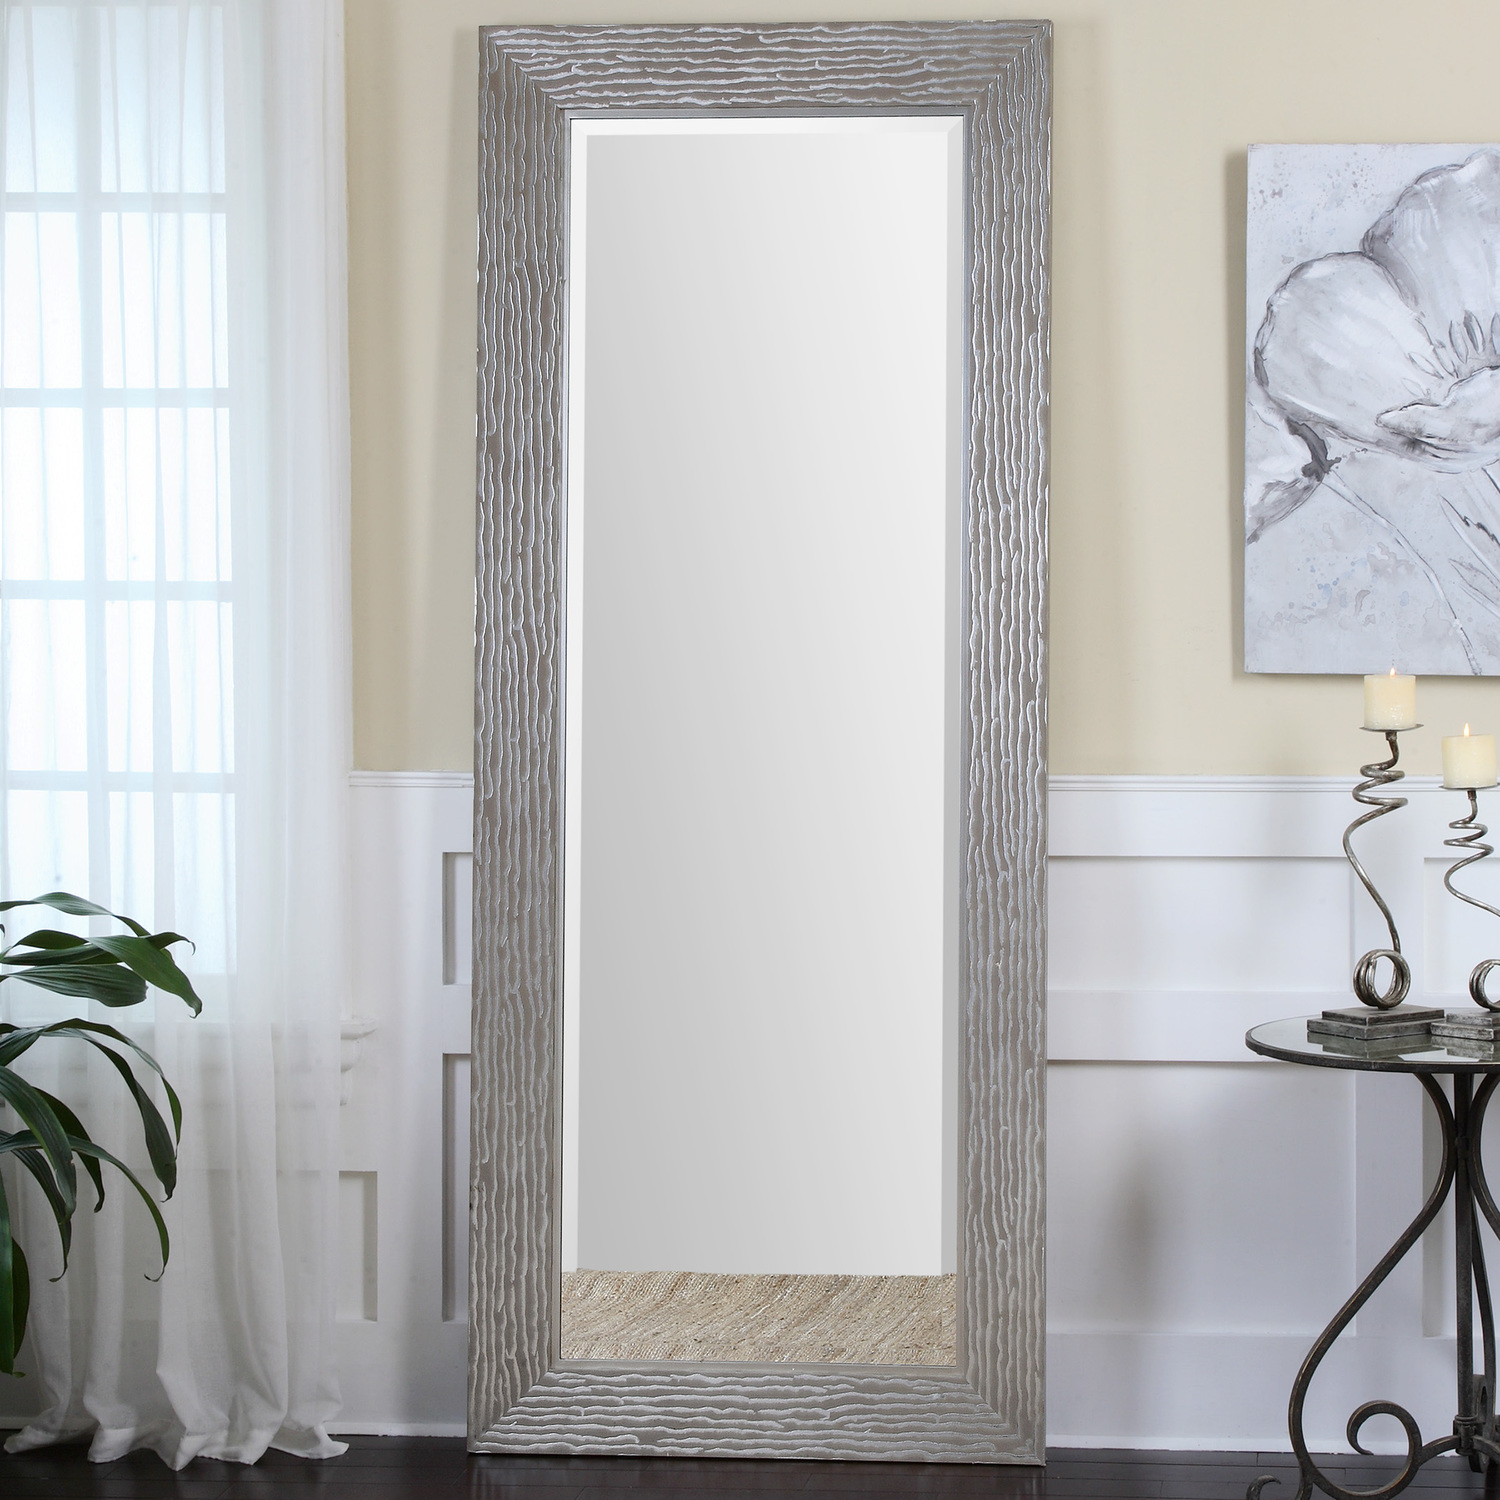 decorative mirror on stand Uttermost Large Silver Mirrors Metallic Silver Finish With A Heavy Taupe Gray Wash. Grace Feyock